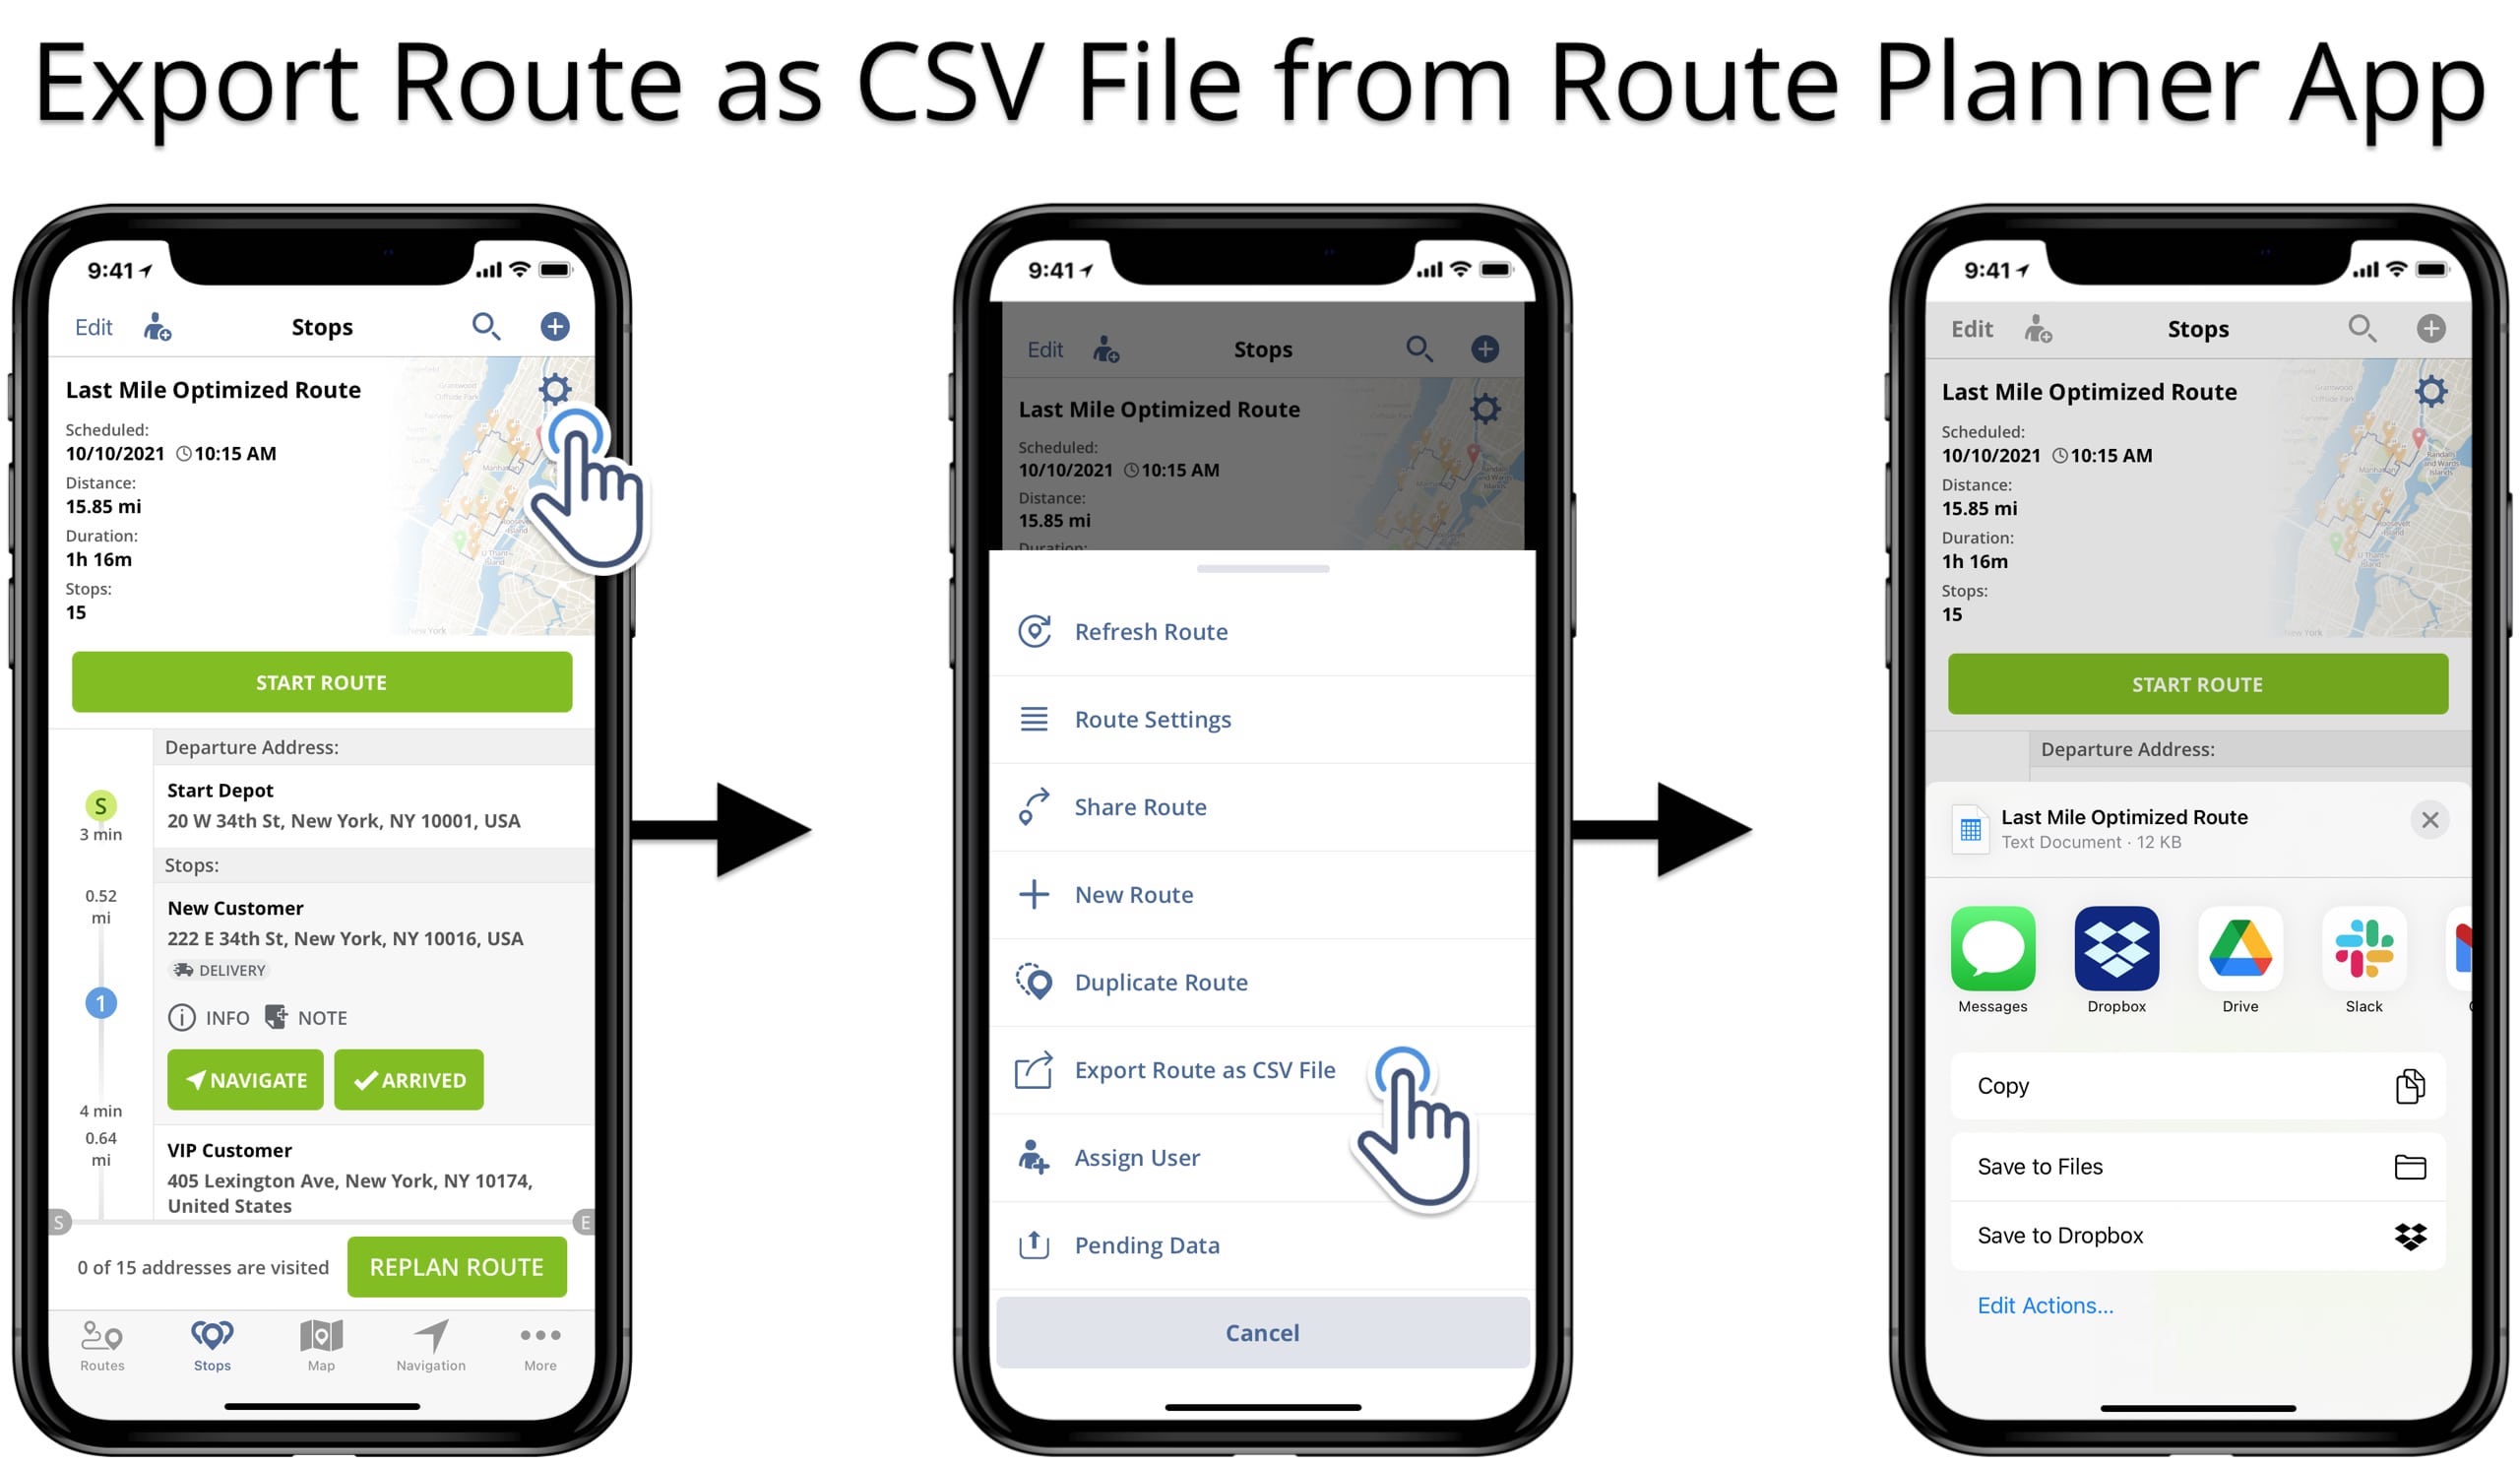 Download route planner routes using an iPhone or iPad.